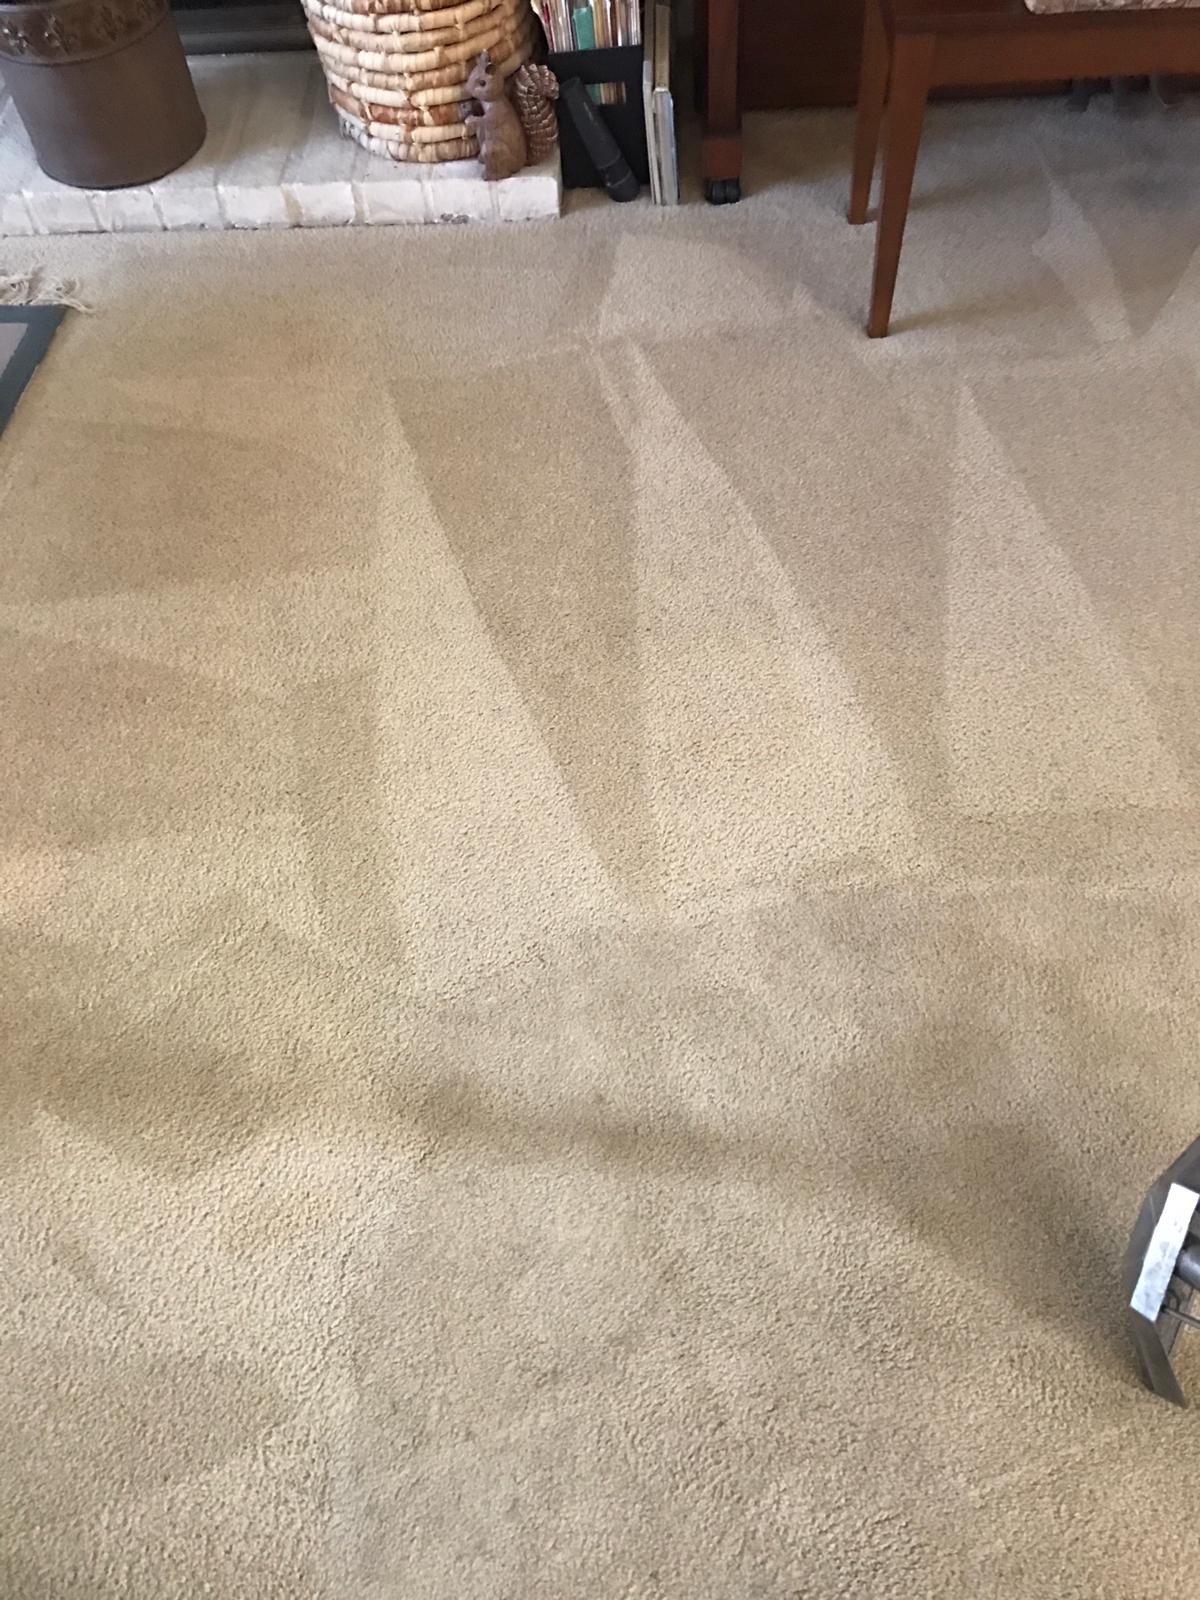 Carpet Cleaning Denver CO Experts - 5 Star Rated - MSS Cleaning